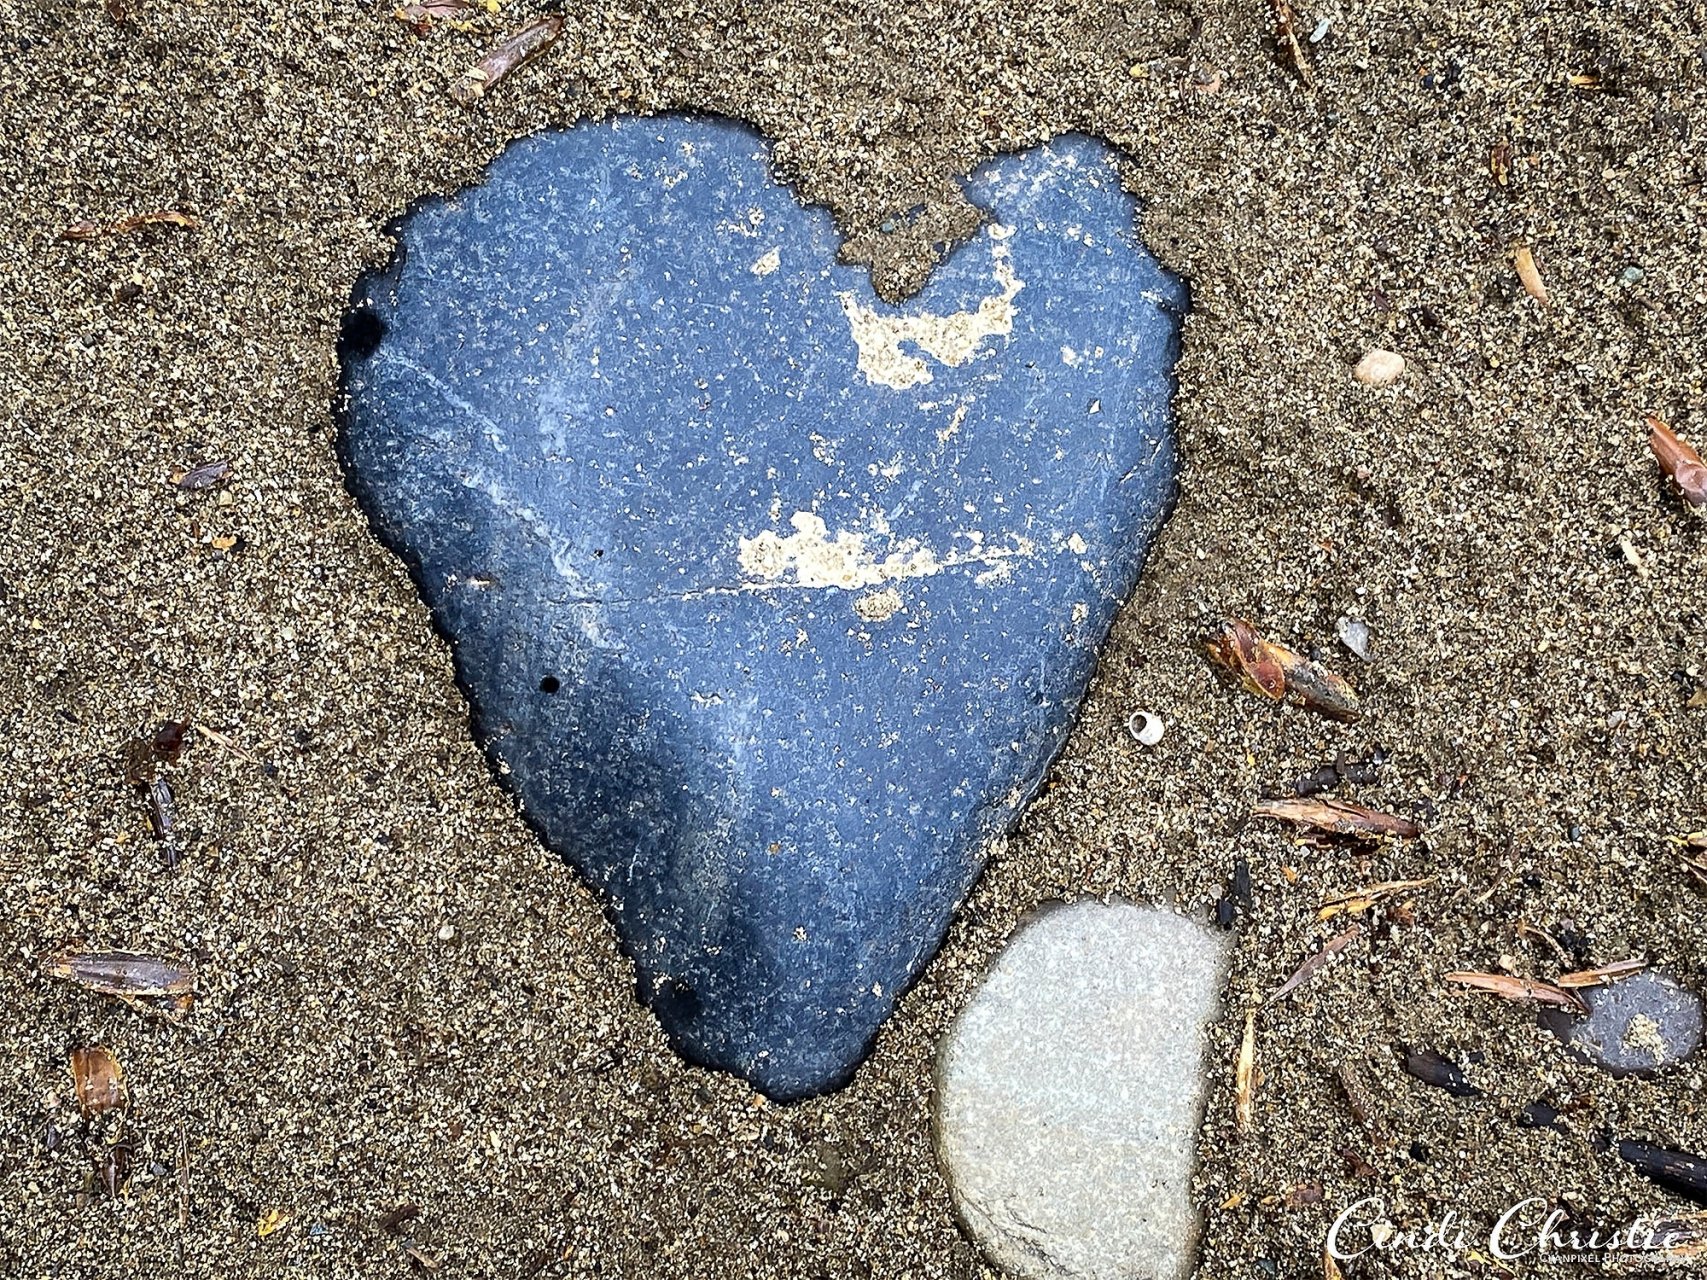 A heart-shaped rock is found at the city’s Island Park on Monday, May 24, 2021, in Salmon, Idaho.  (© 2021 Cindi Christie/Cyanpixel)